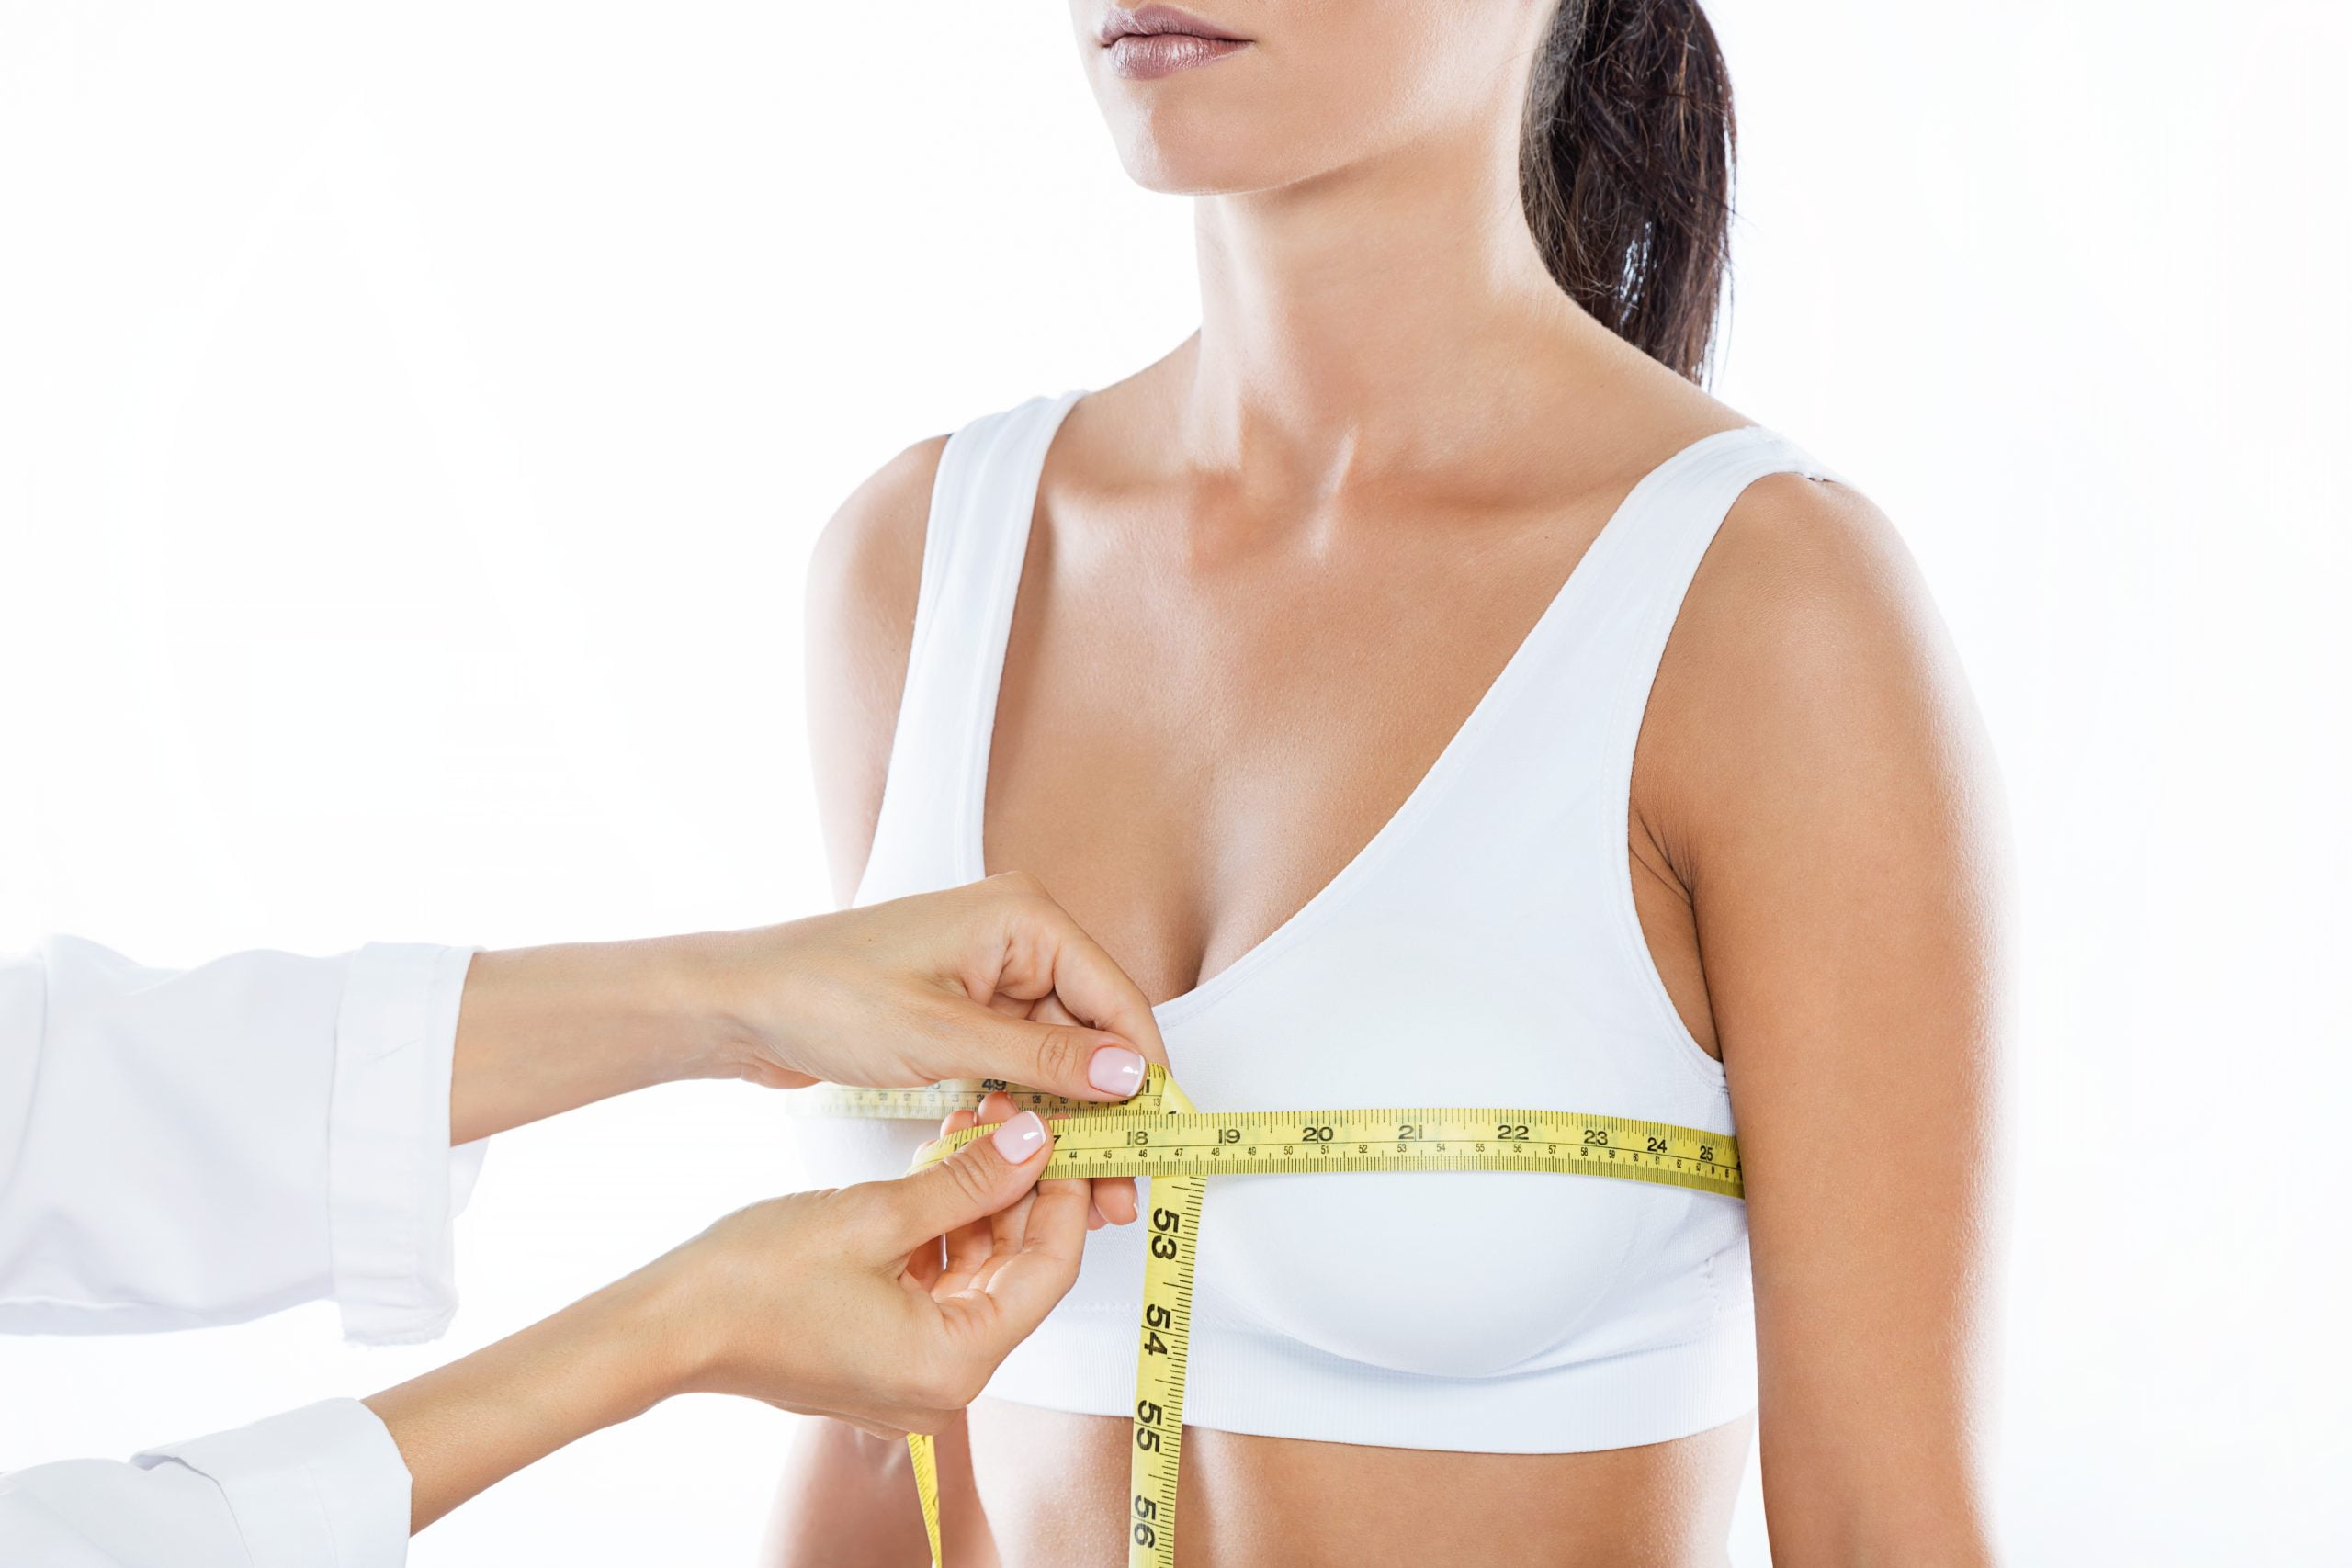 What is Breast Lift Surgery? Is it risky?